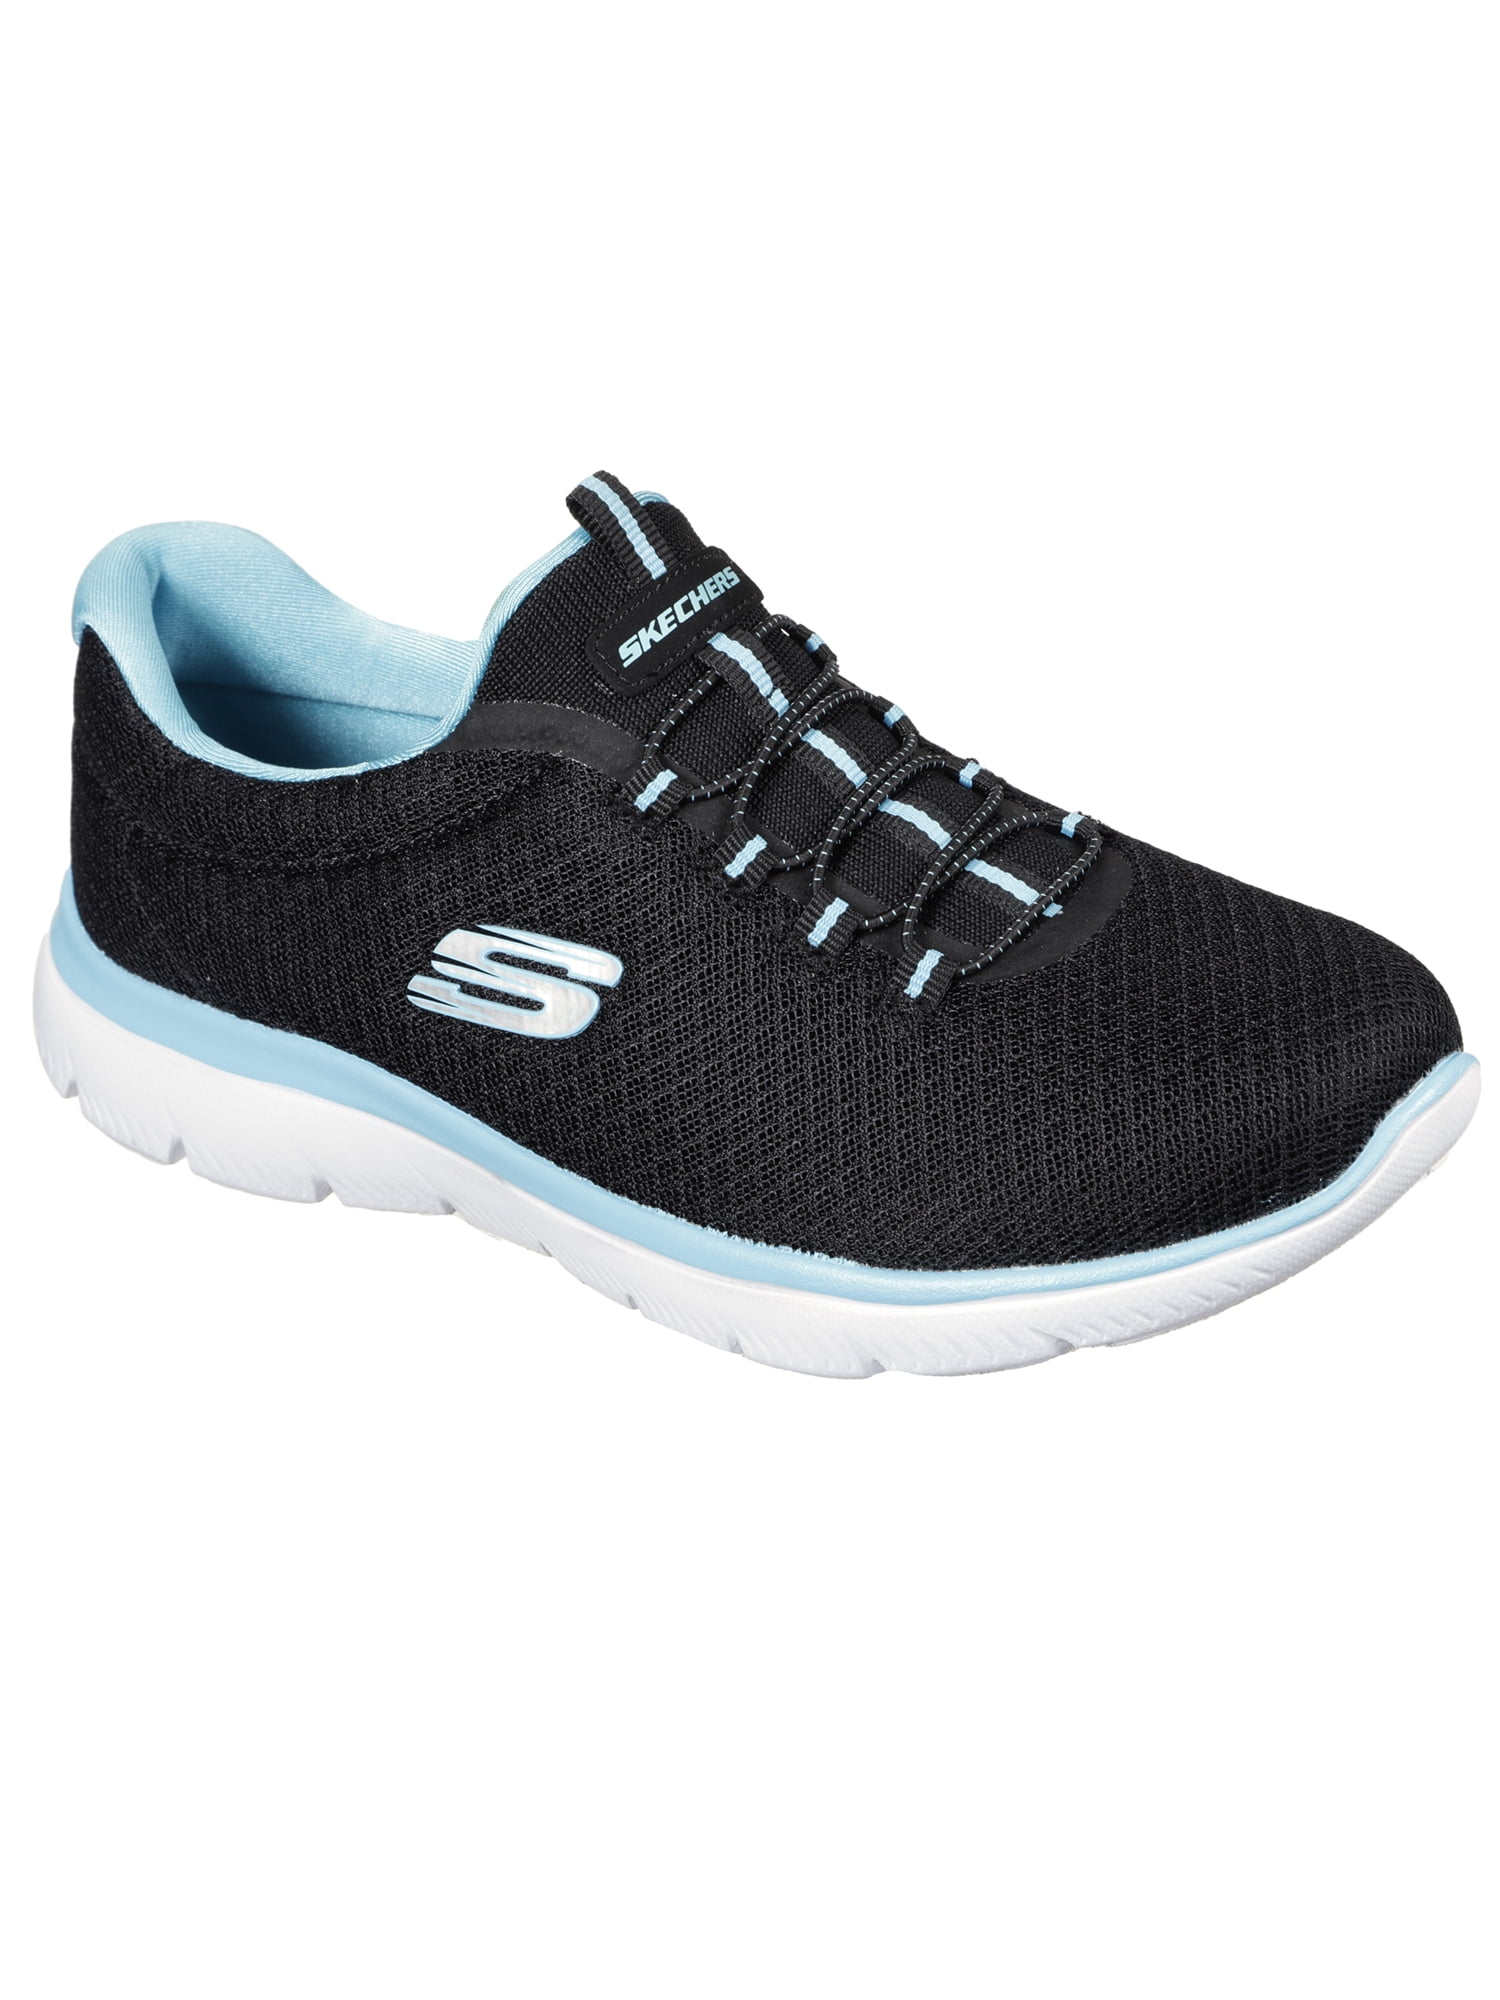 Women's Sport Summits Mesh Slip-on Athletic Sneaker Available) -